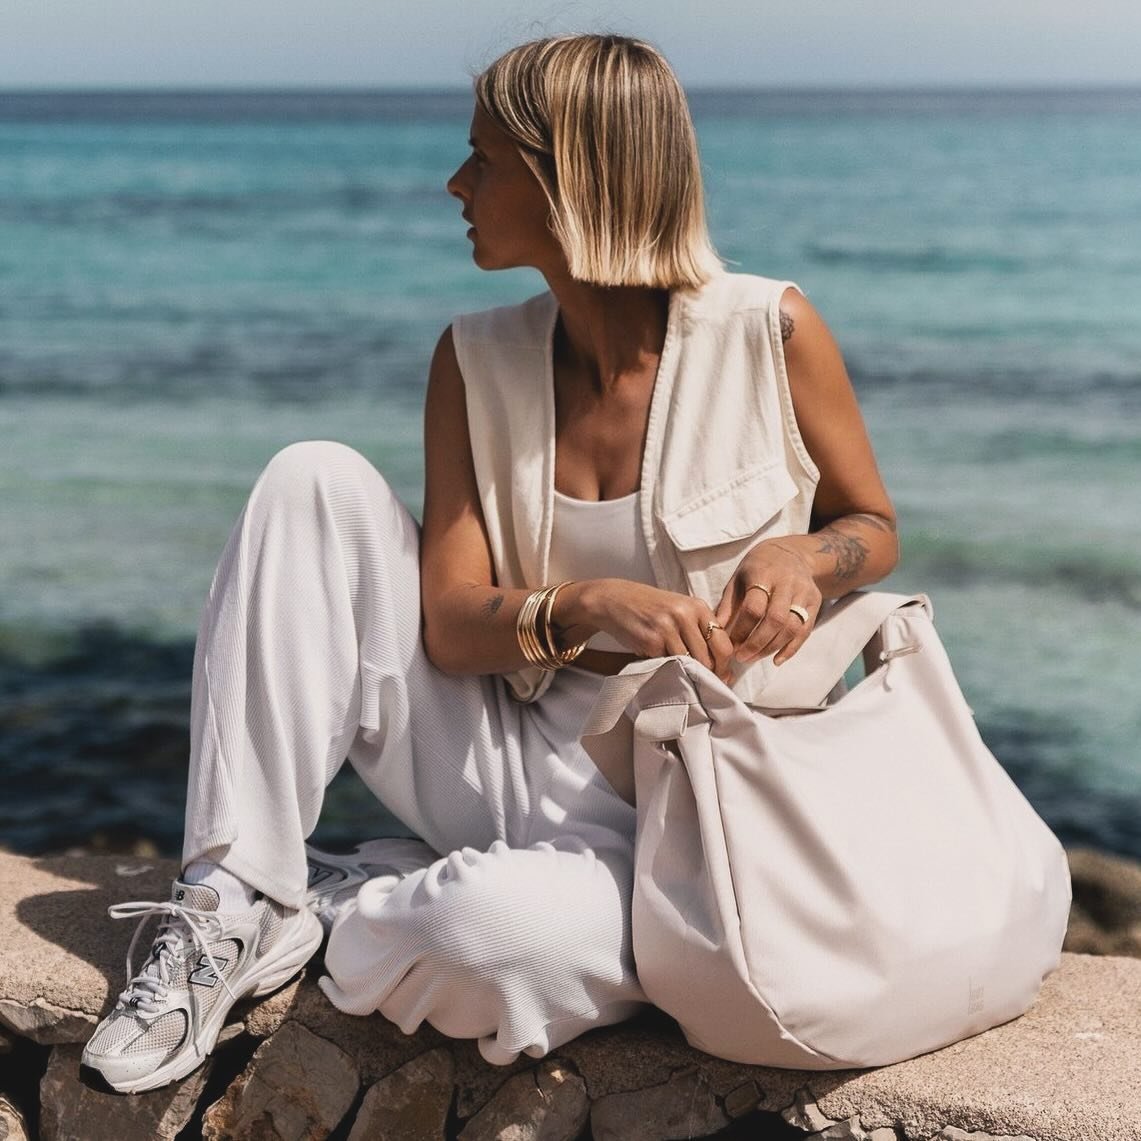 Curved and comfy @gotbag 
.
.
.
.
.
.
.
.
.
.
#gotbag #curved #curvedbag #travelbag #travelbags #travellight #travellife #travellifestyle #greenbag #greenbags #sustainablebags #sustainablebag #newbag #newbags #newbagscollection #fromtrashtotreasure #